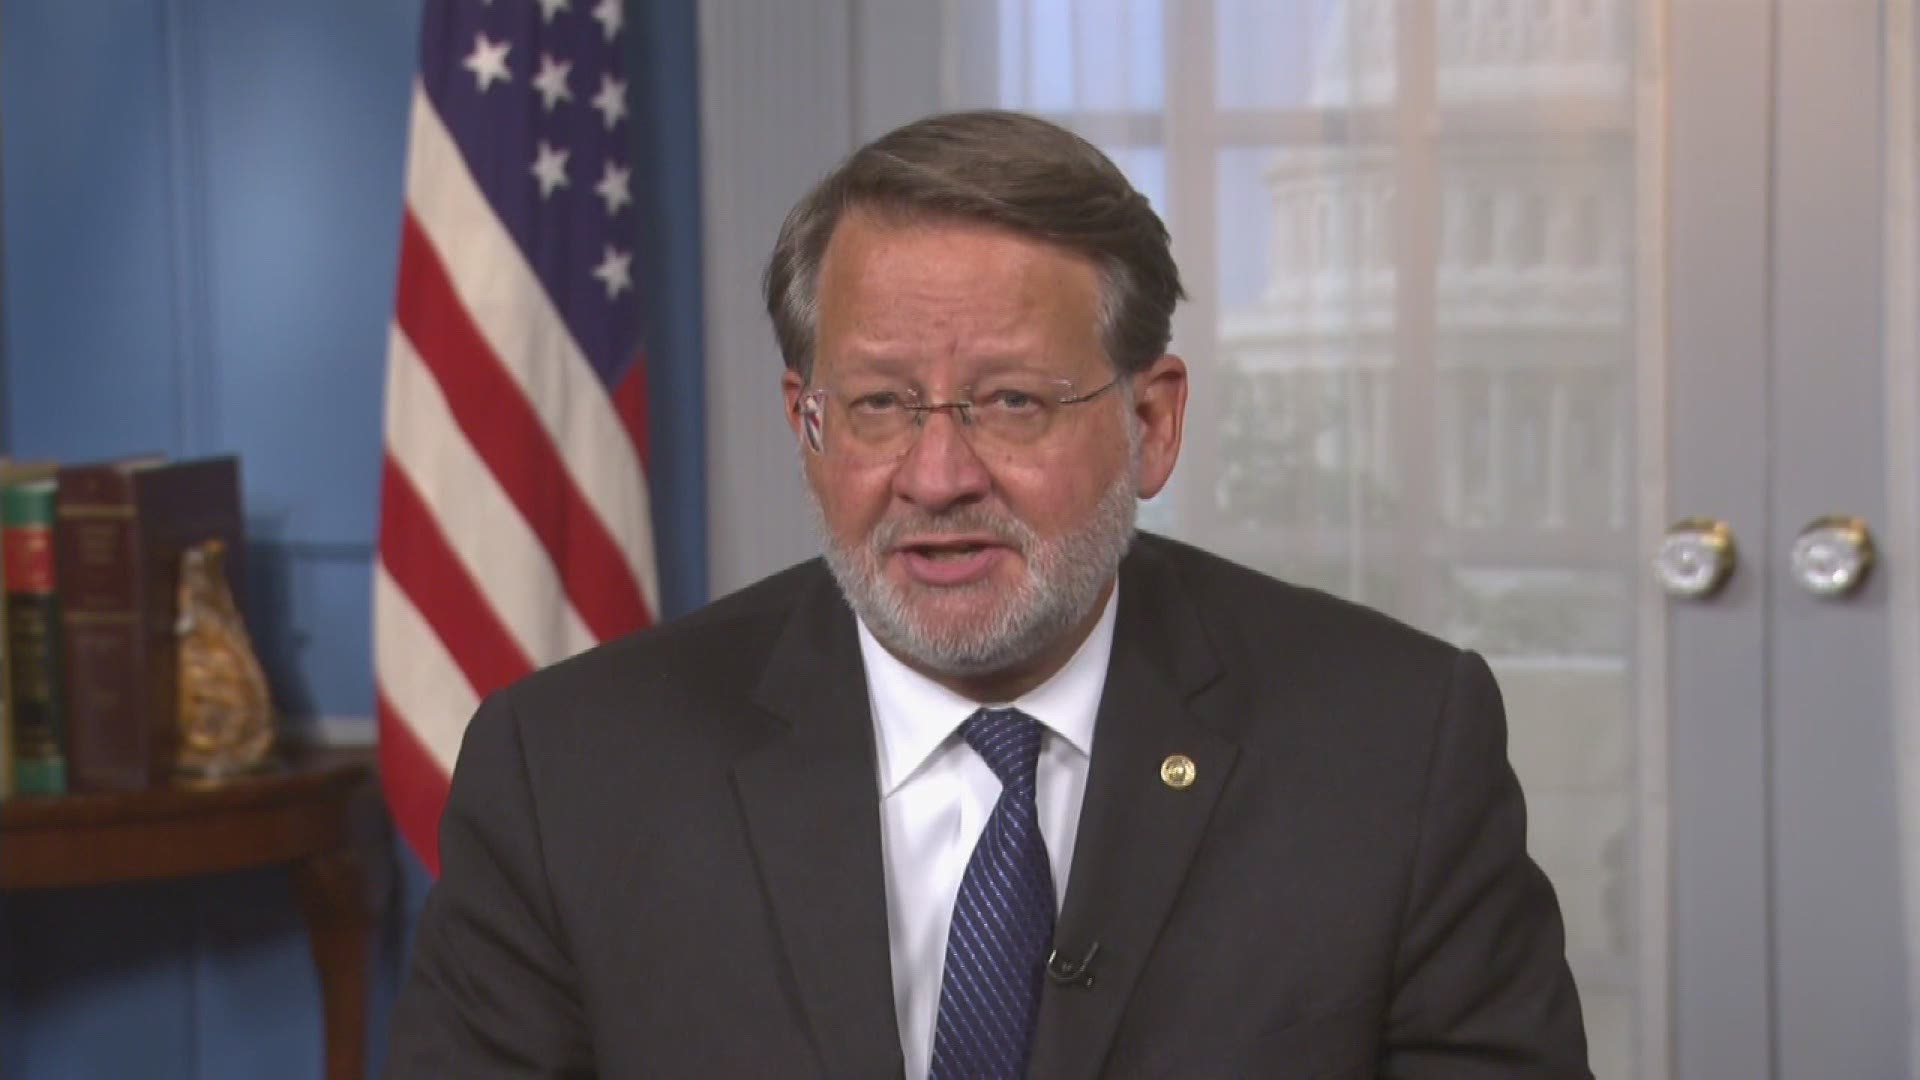 Senator Gary Peters talked on Wednesday about continuing the $600 weekly unemployment benefit.